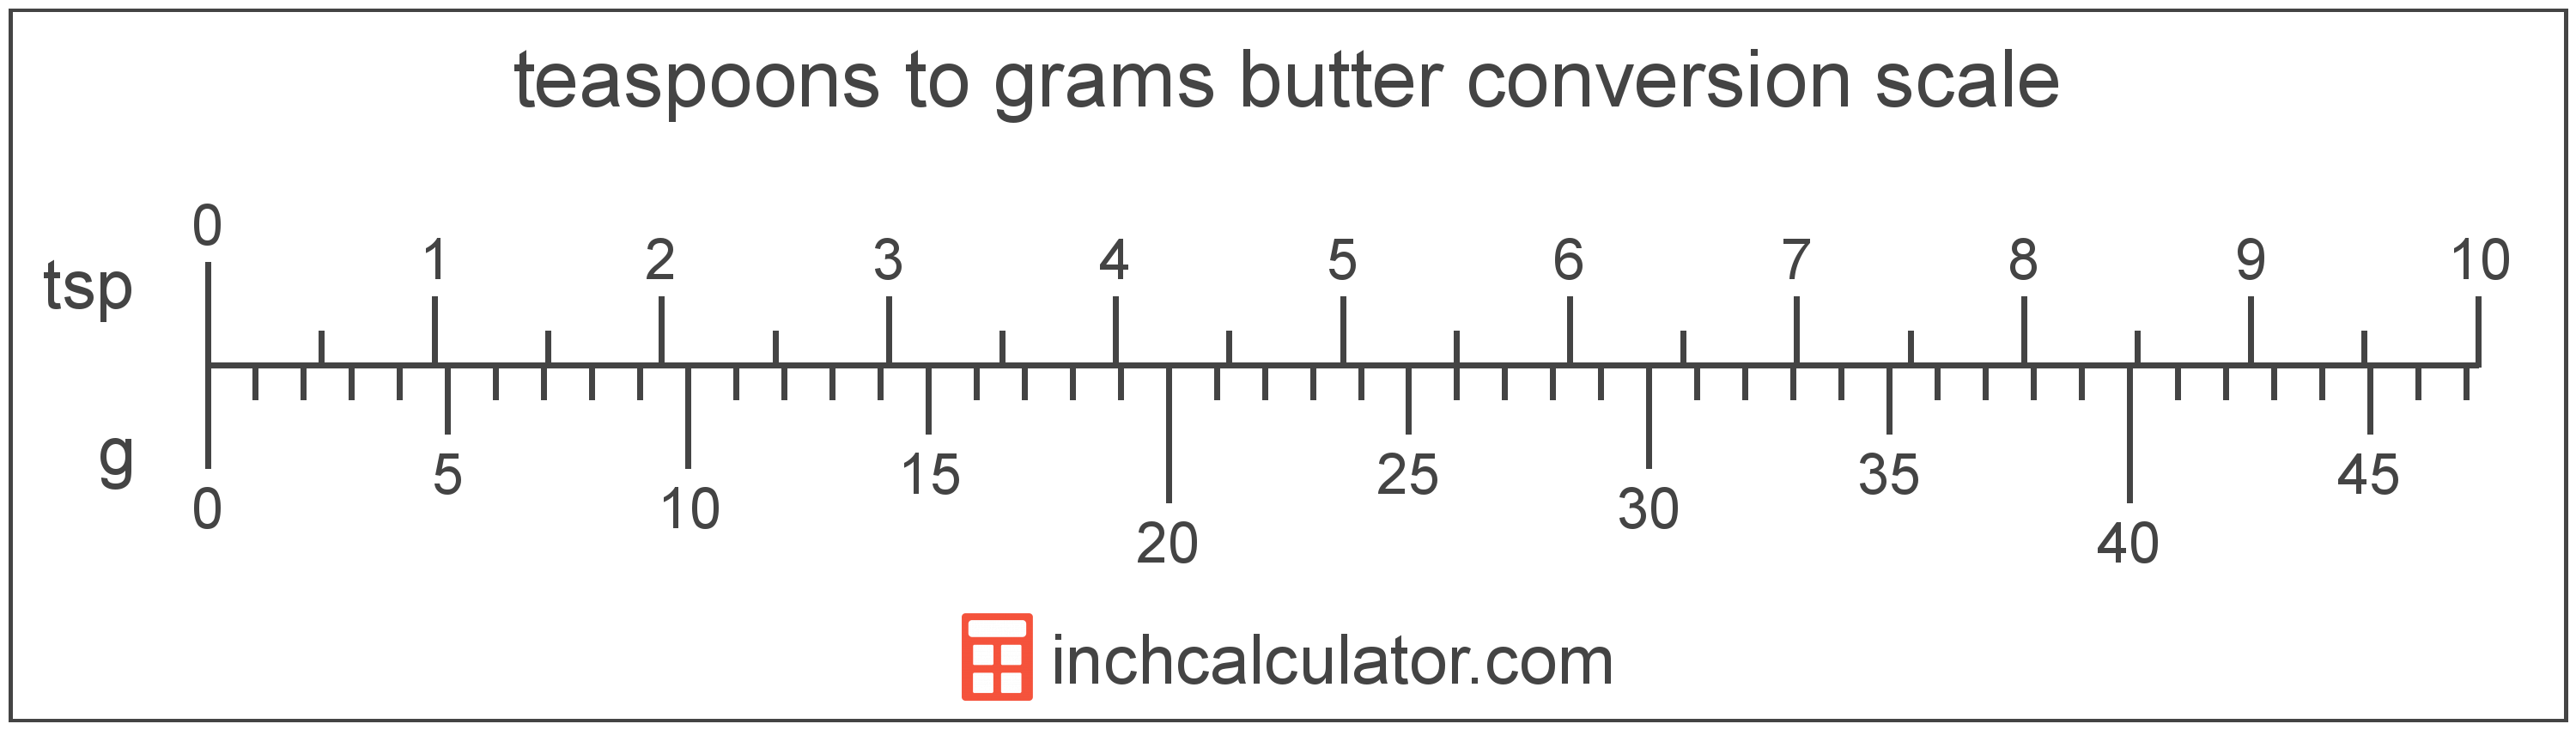 conversion scale showing grams and equivalent teaspoons butter values